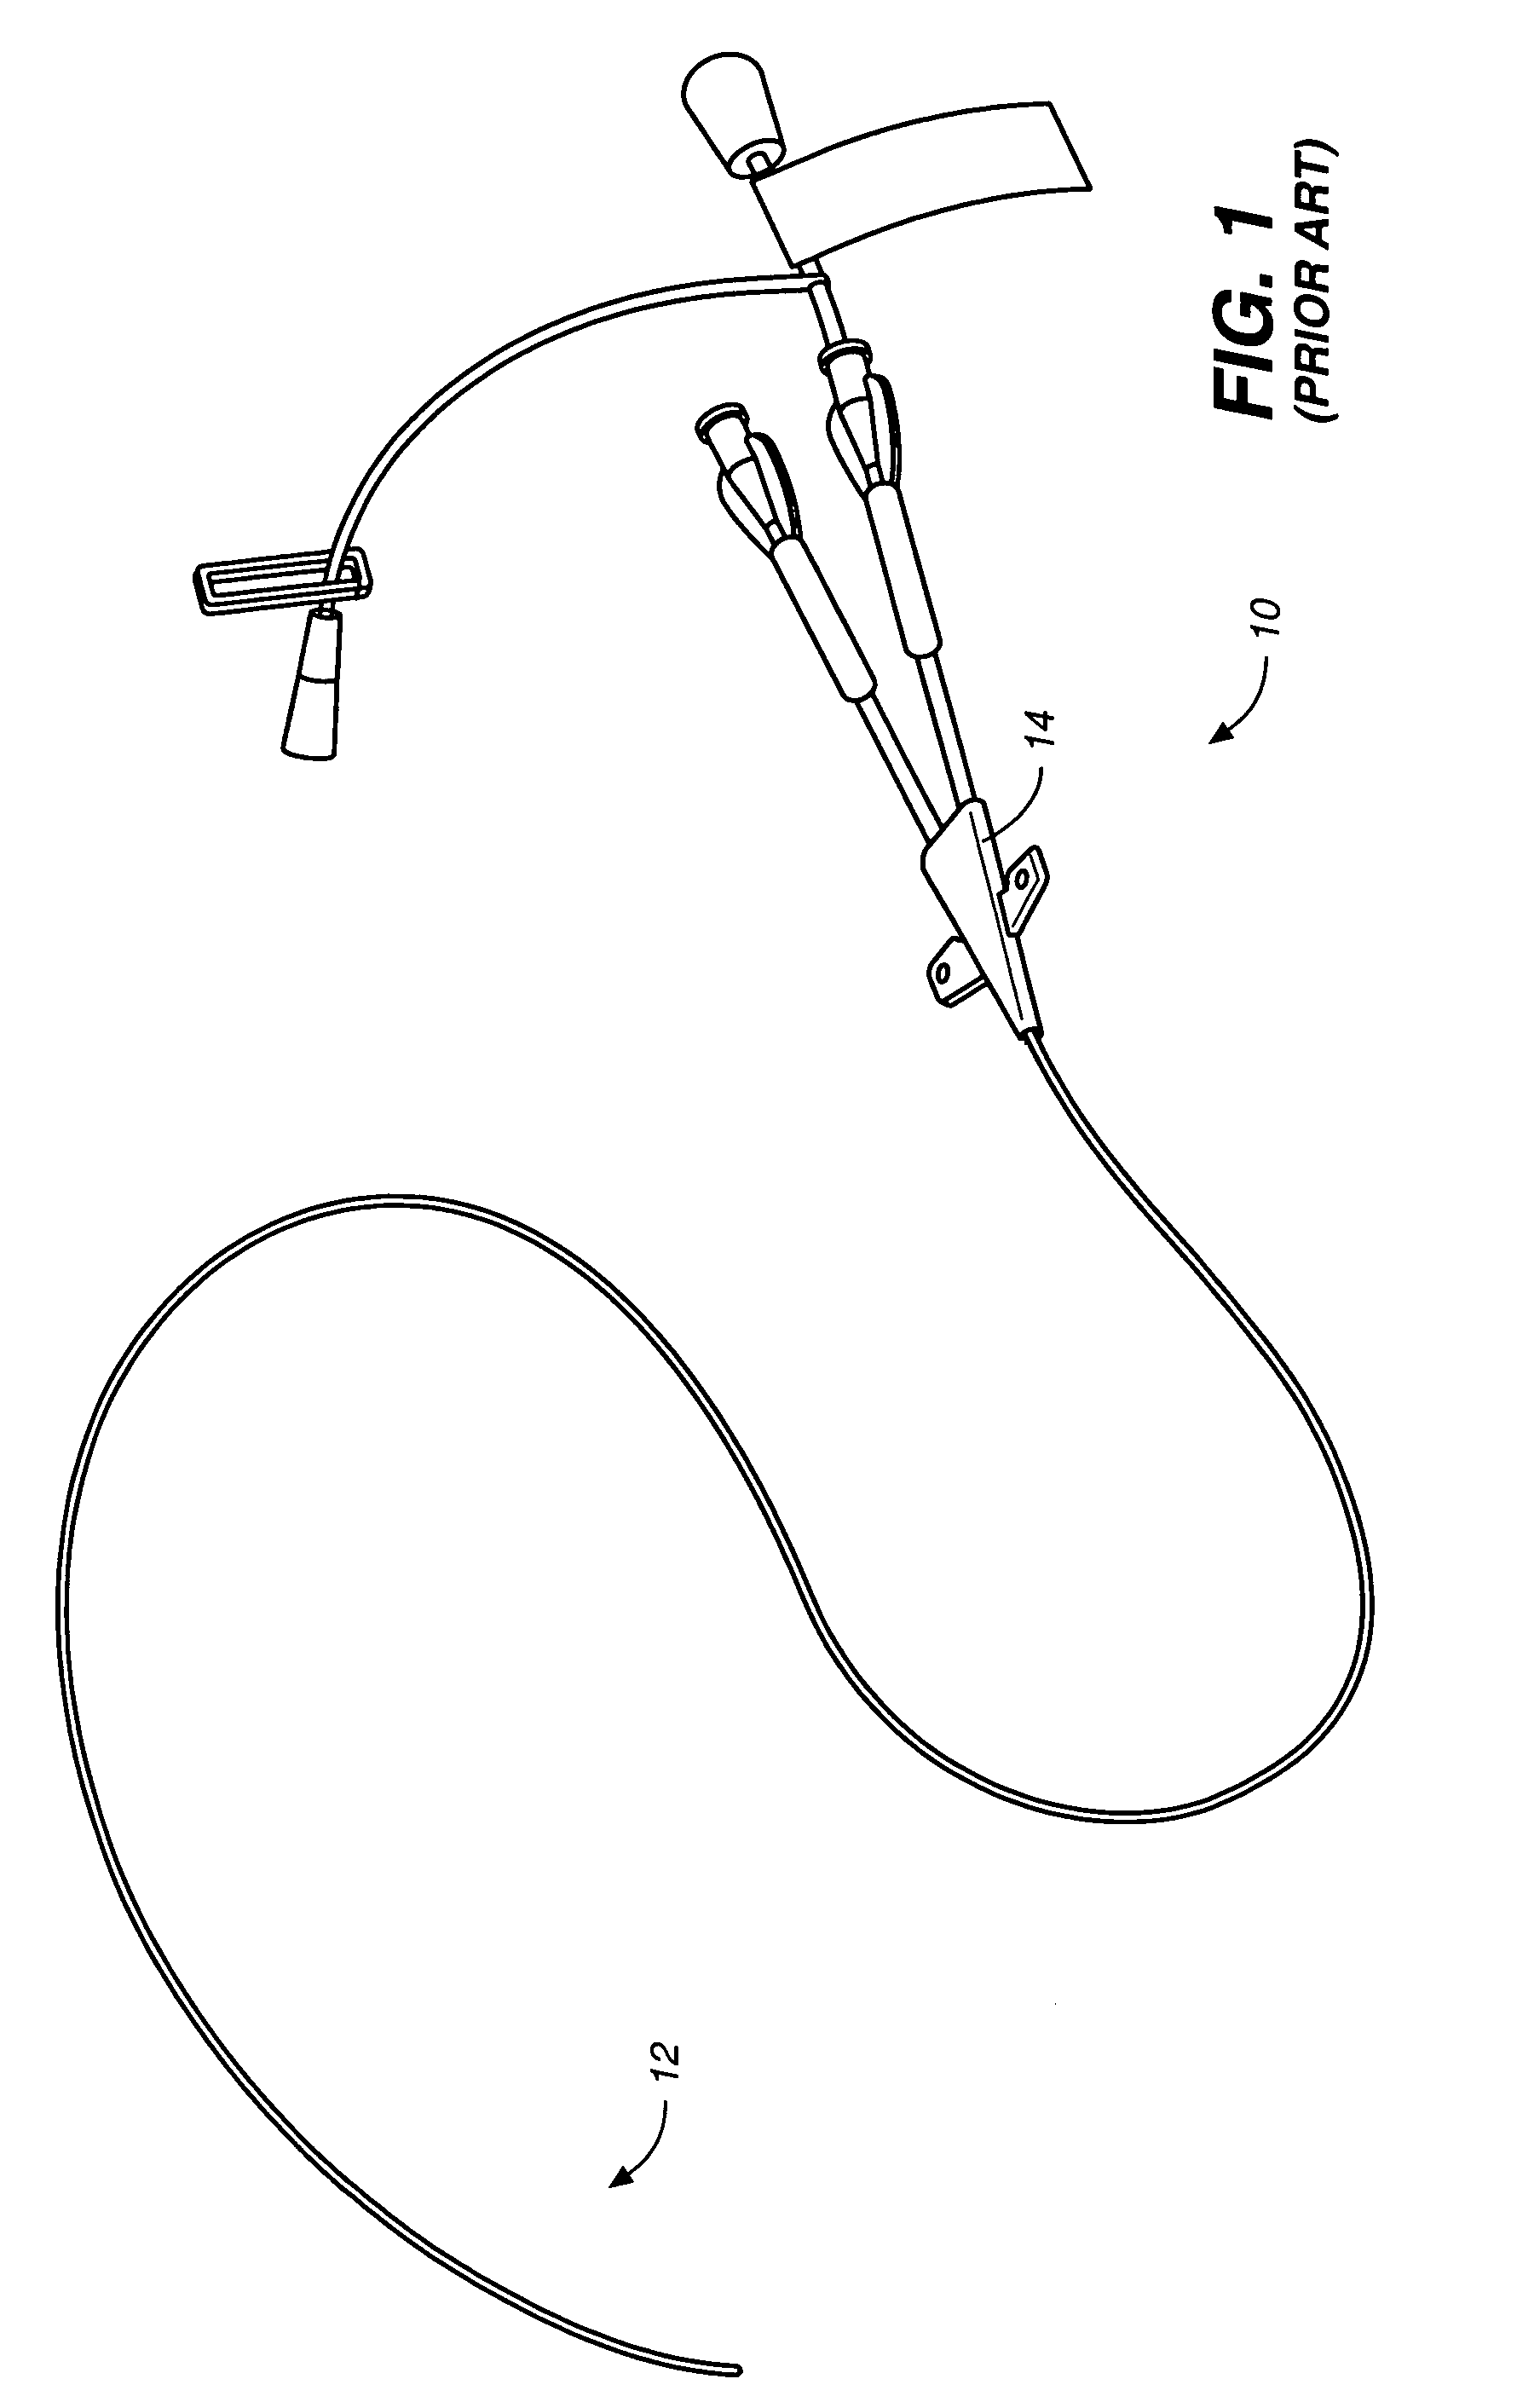 Catheter connector system